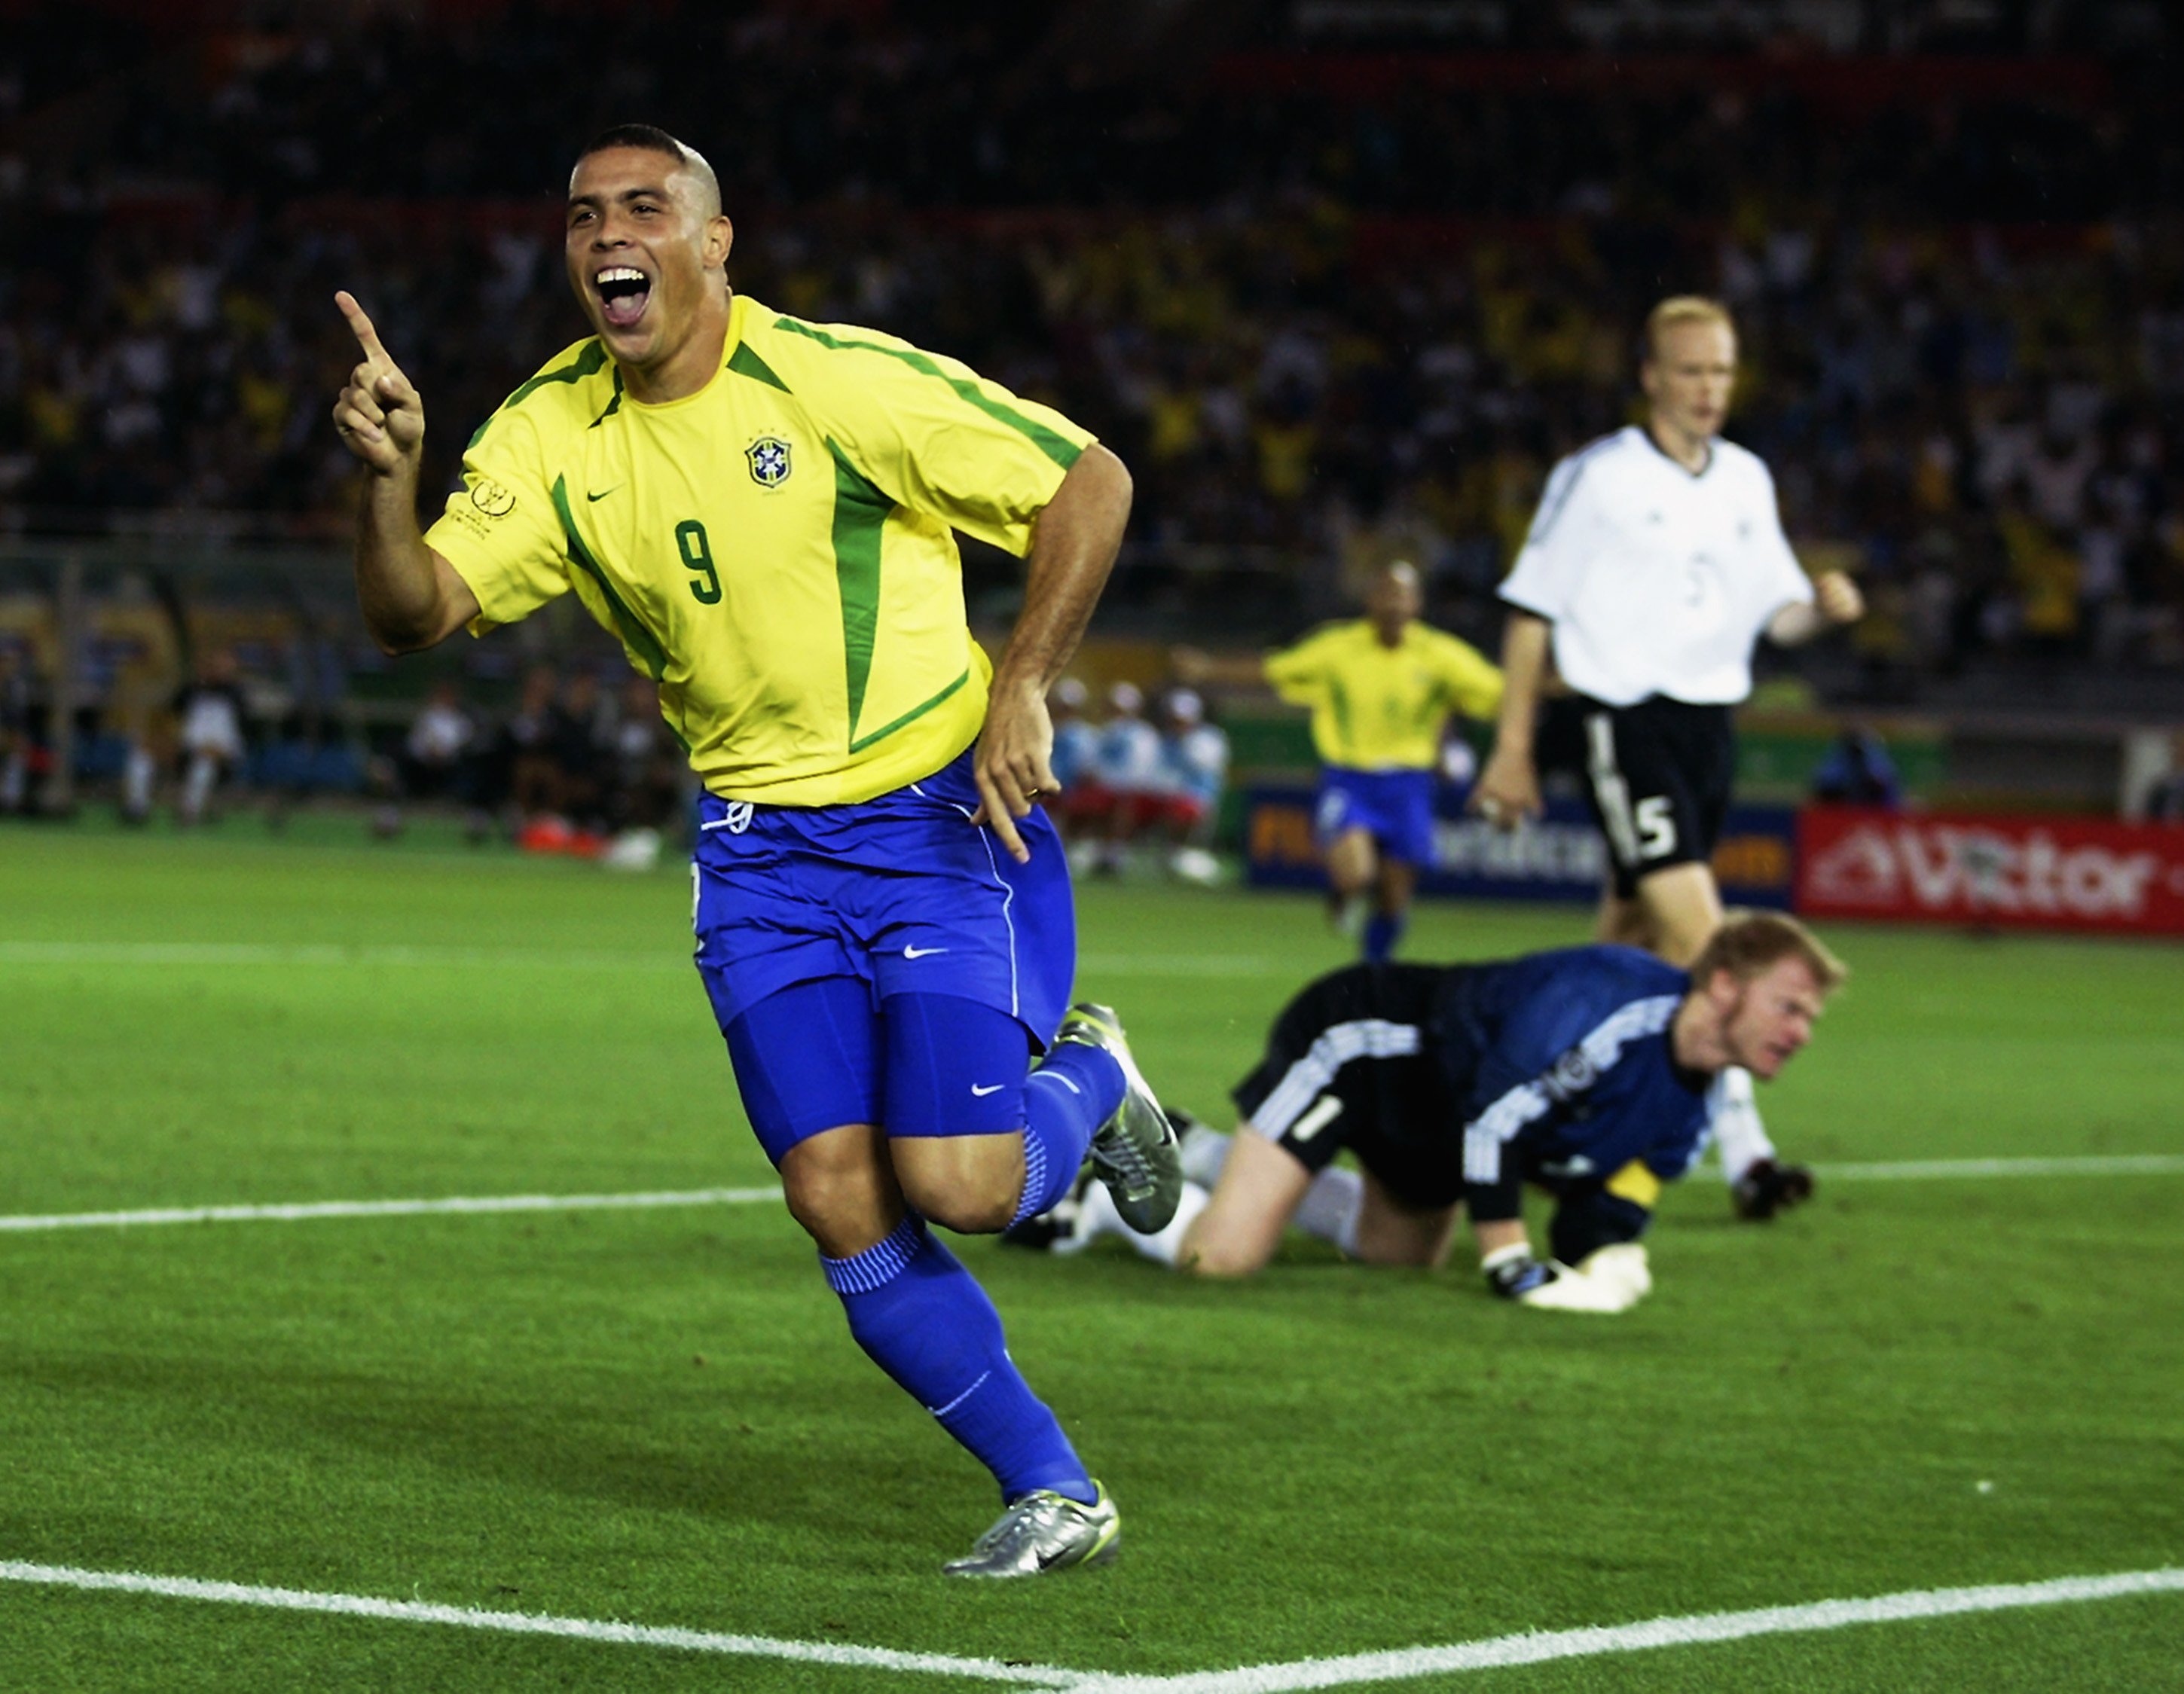 YOKOHAMA - JUNE 30:  Ronaldo of Brazil celebrates after scoring opening goal during the Germany v Brazil, World Cup Final match played at the International Stadium Yokohama in Yokohama, Japan on June 30, 2002. Brazil won 2-0. (Photo by David Cannon/Getty